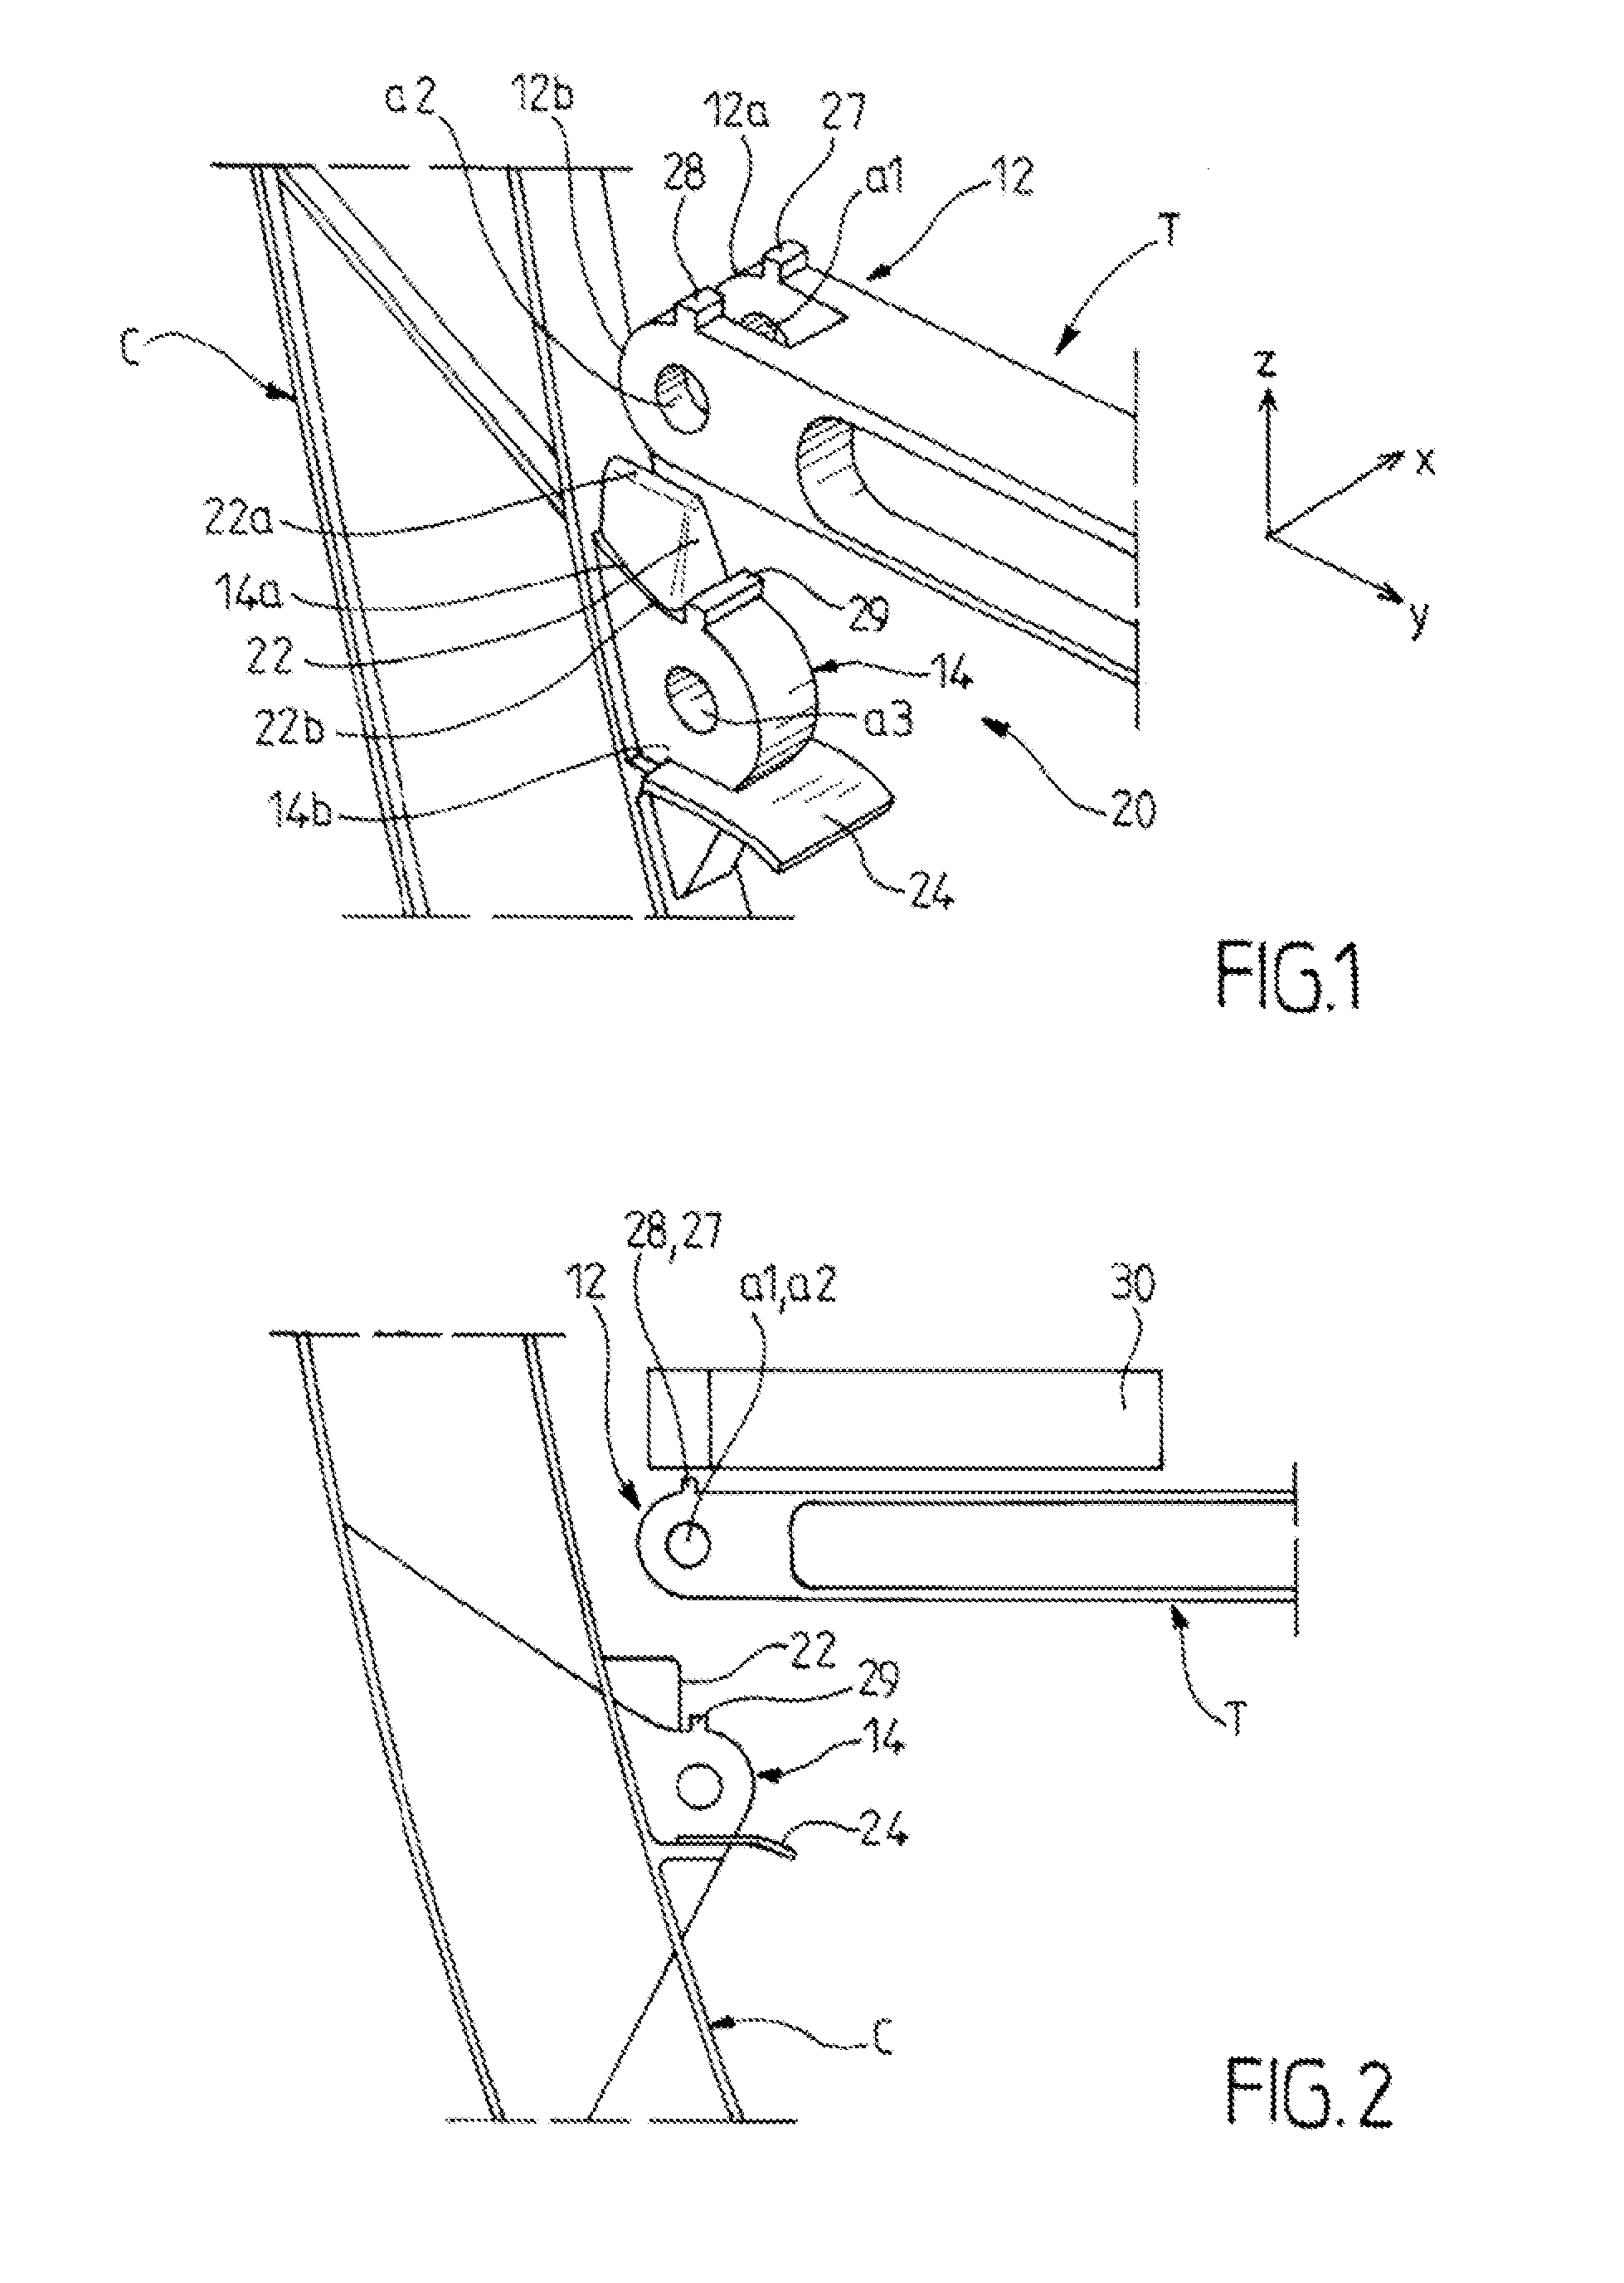 Device positioning two aircraft pieces relative to one another, such as a crossbeam and a fuselage frame